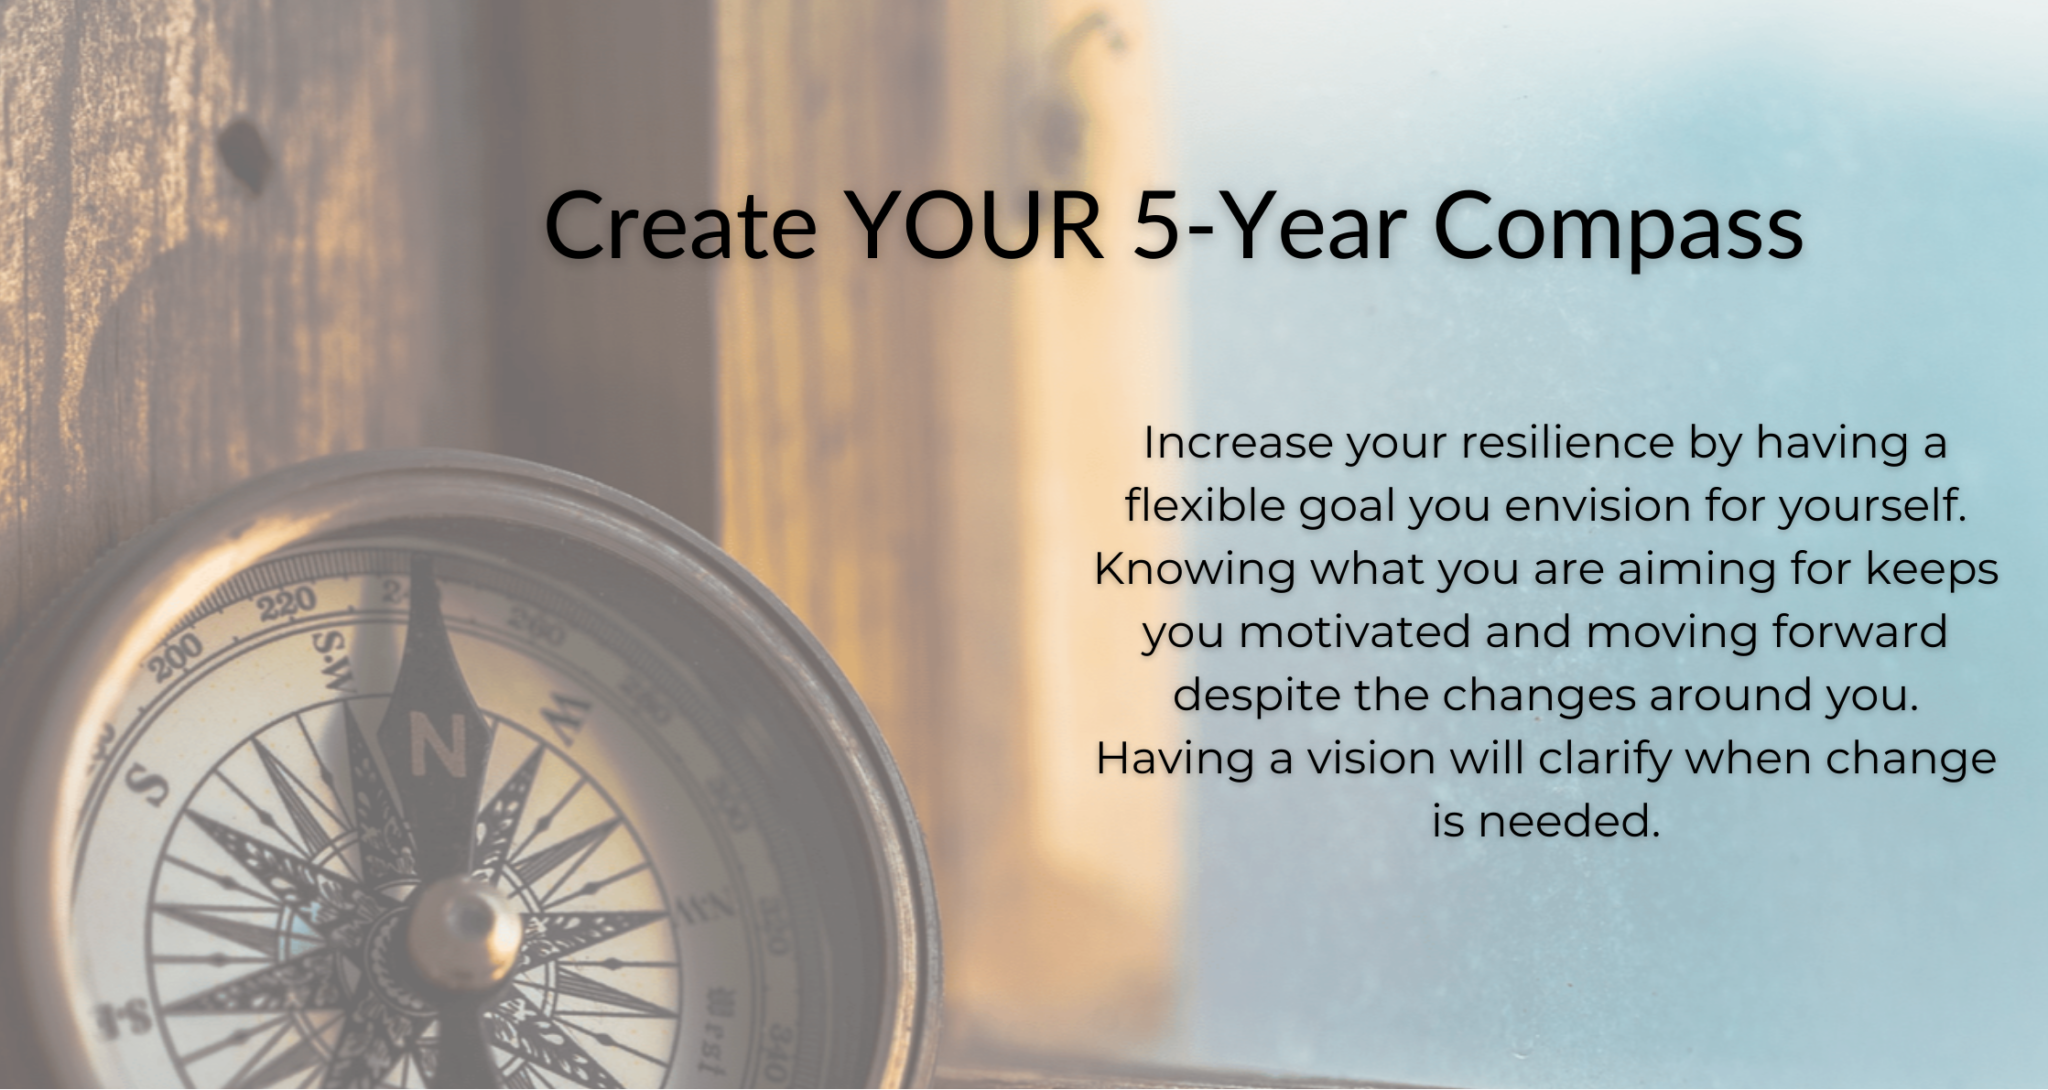 Banner advertising upcoming course "Create your 5-year compass."